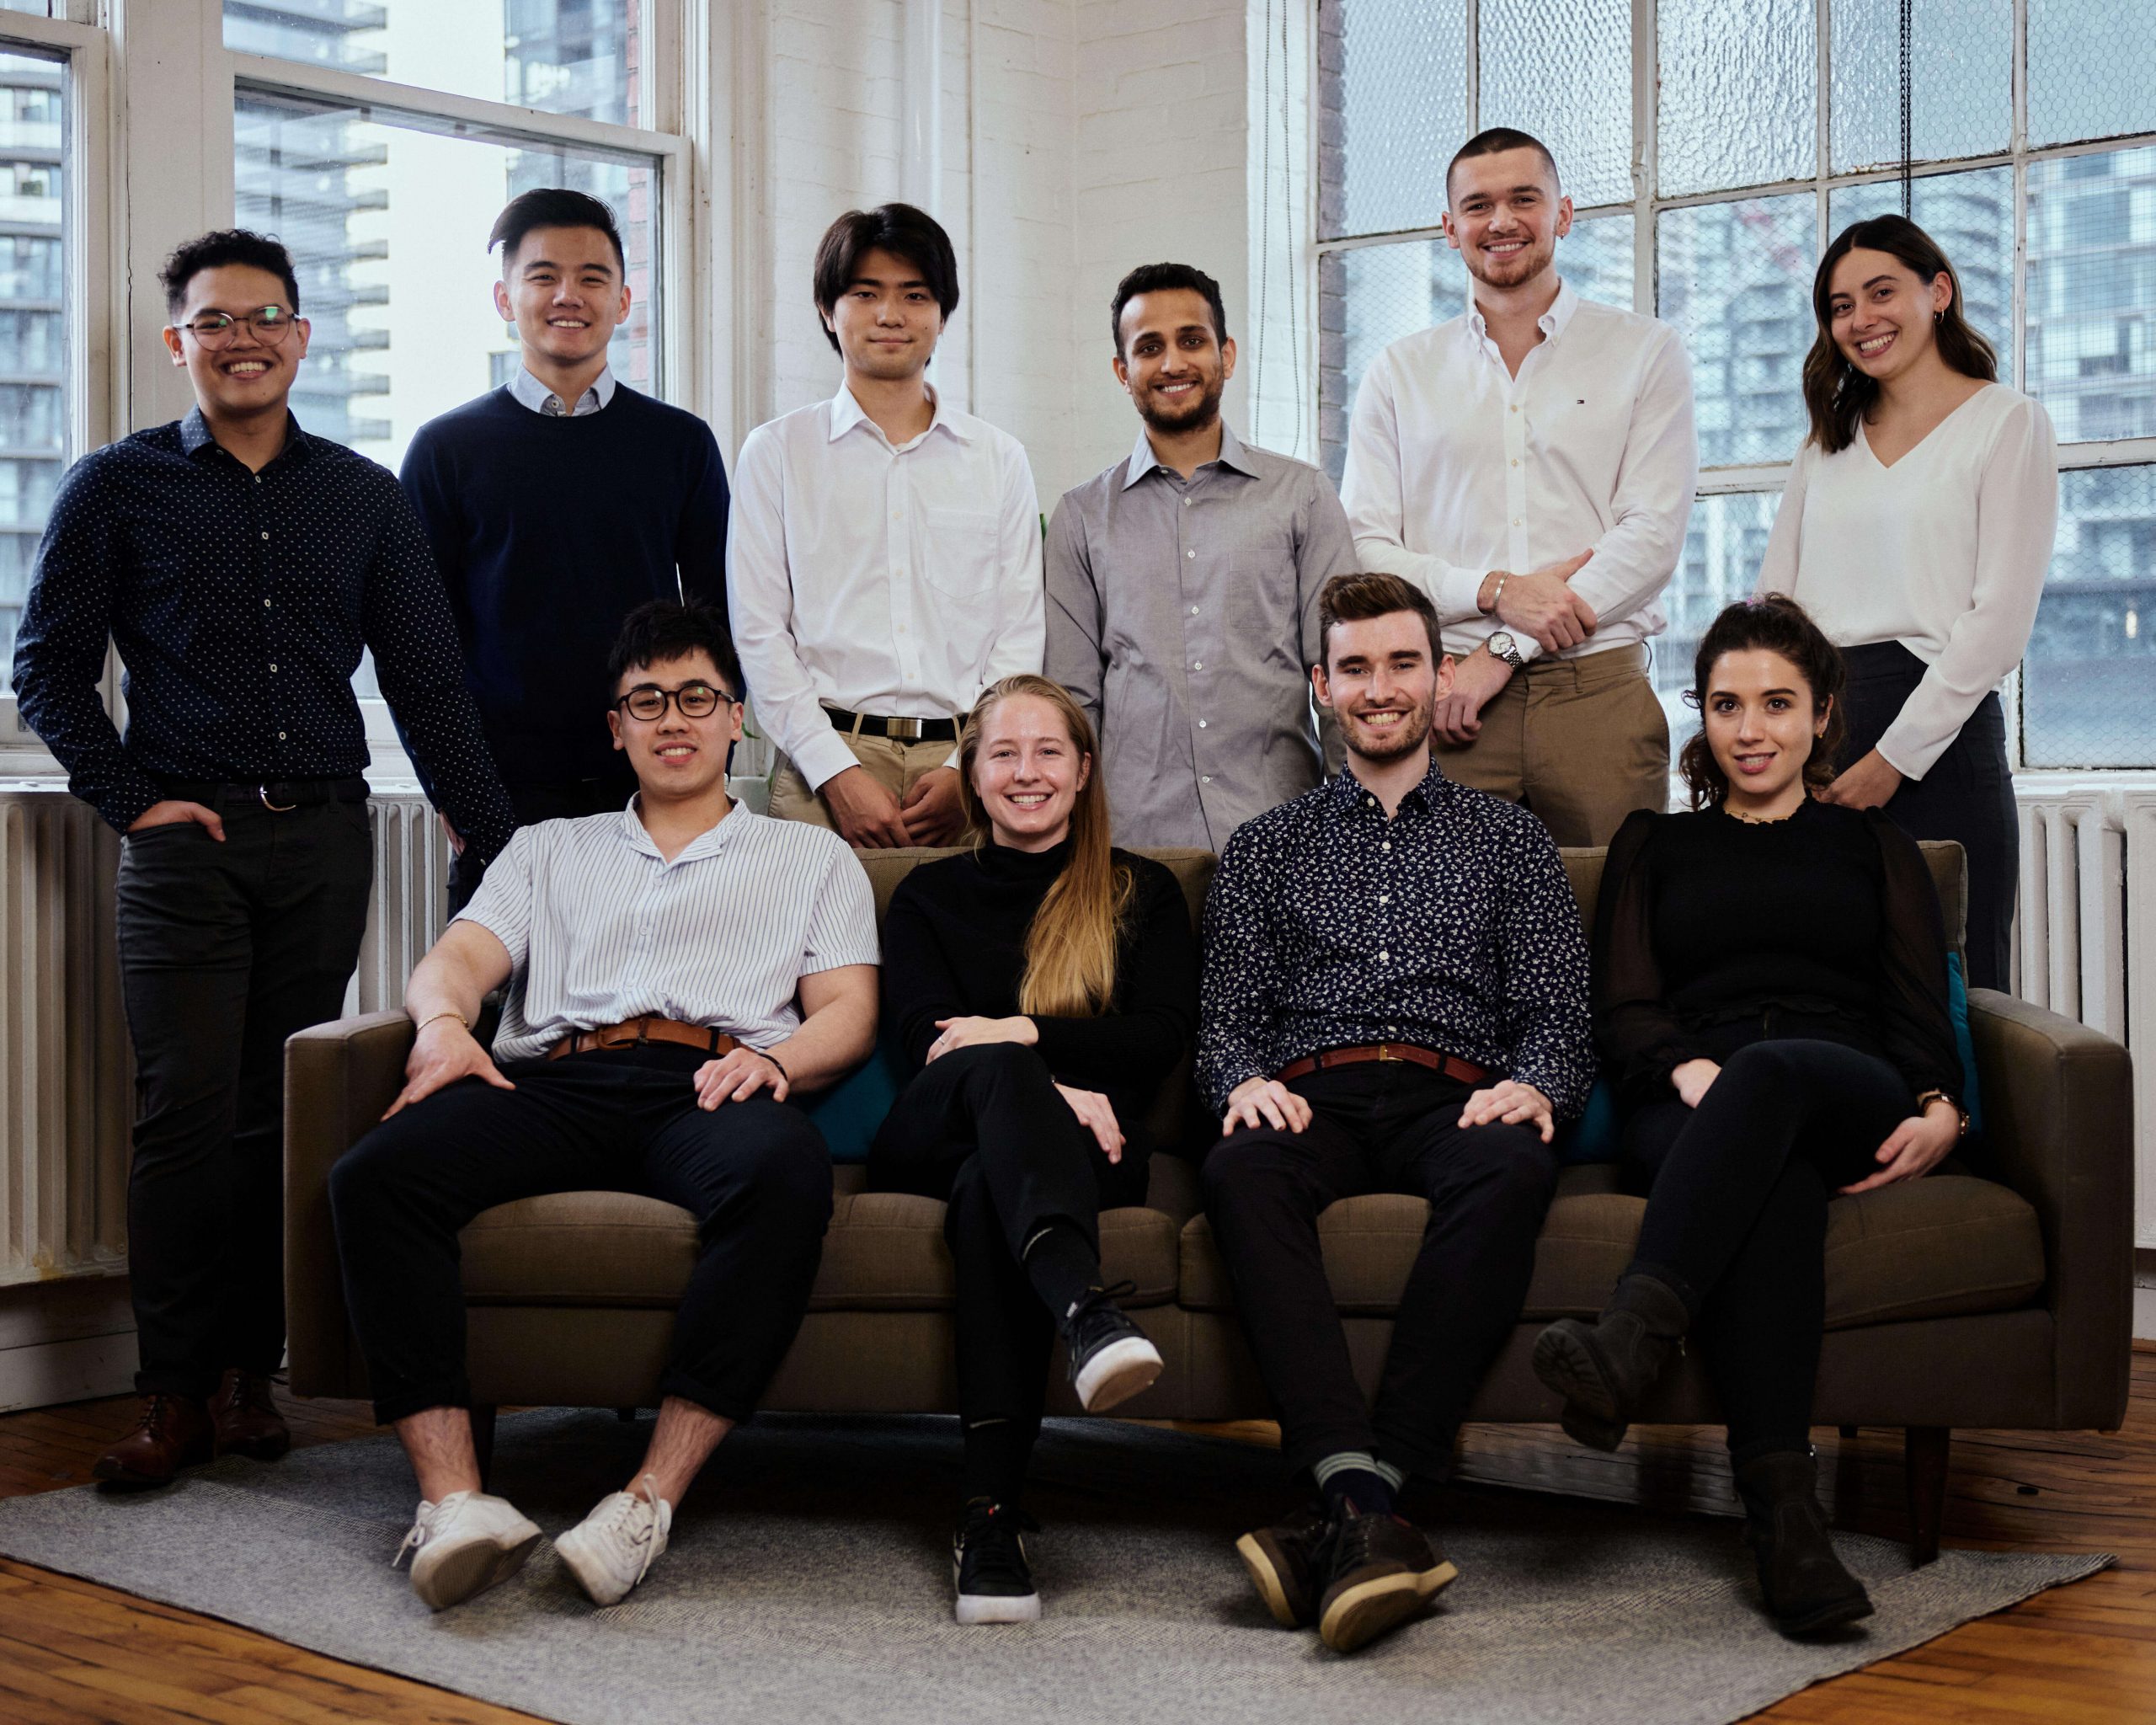 The Nimbus Learning – a group of 10 professionally dressed workers smile for the camera. They are all posed standing or sitting on a blue couch